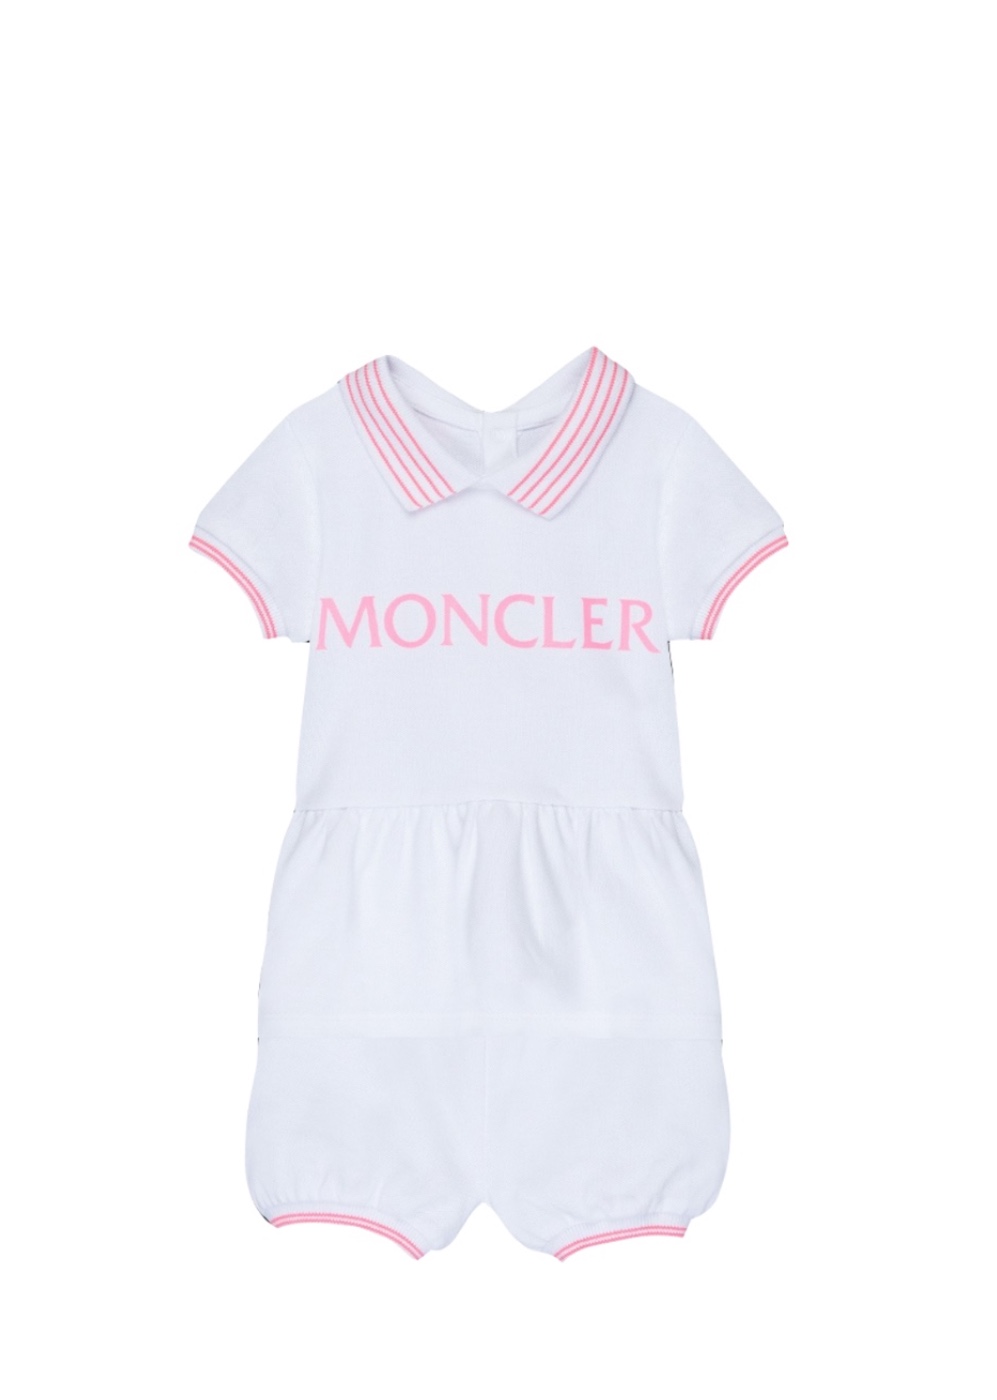 Featured image for “Moncler Completino neonata”